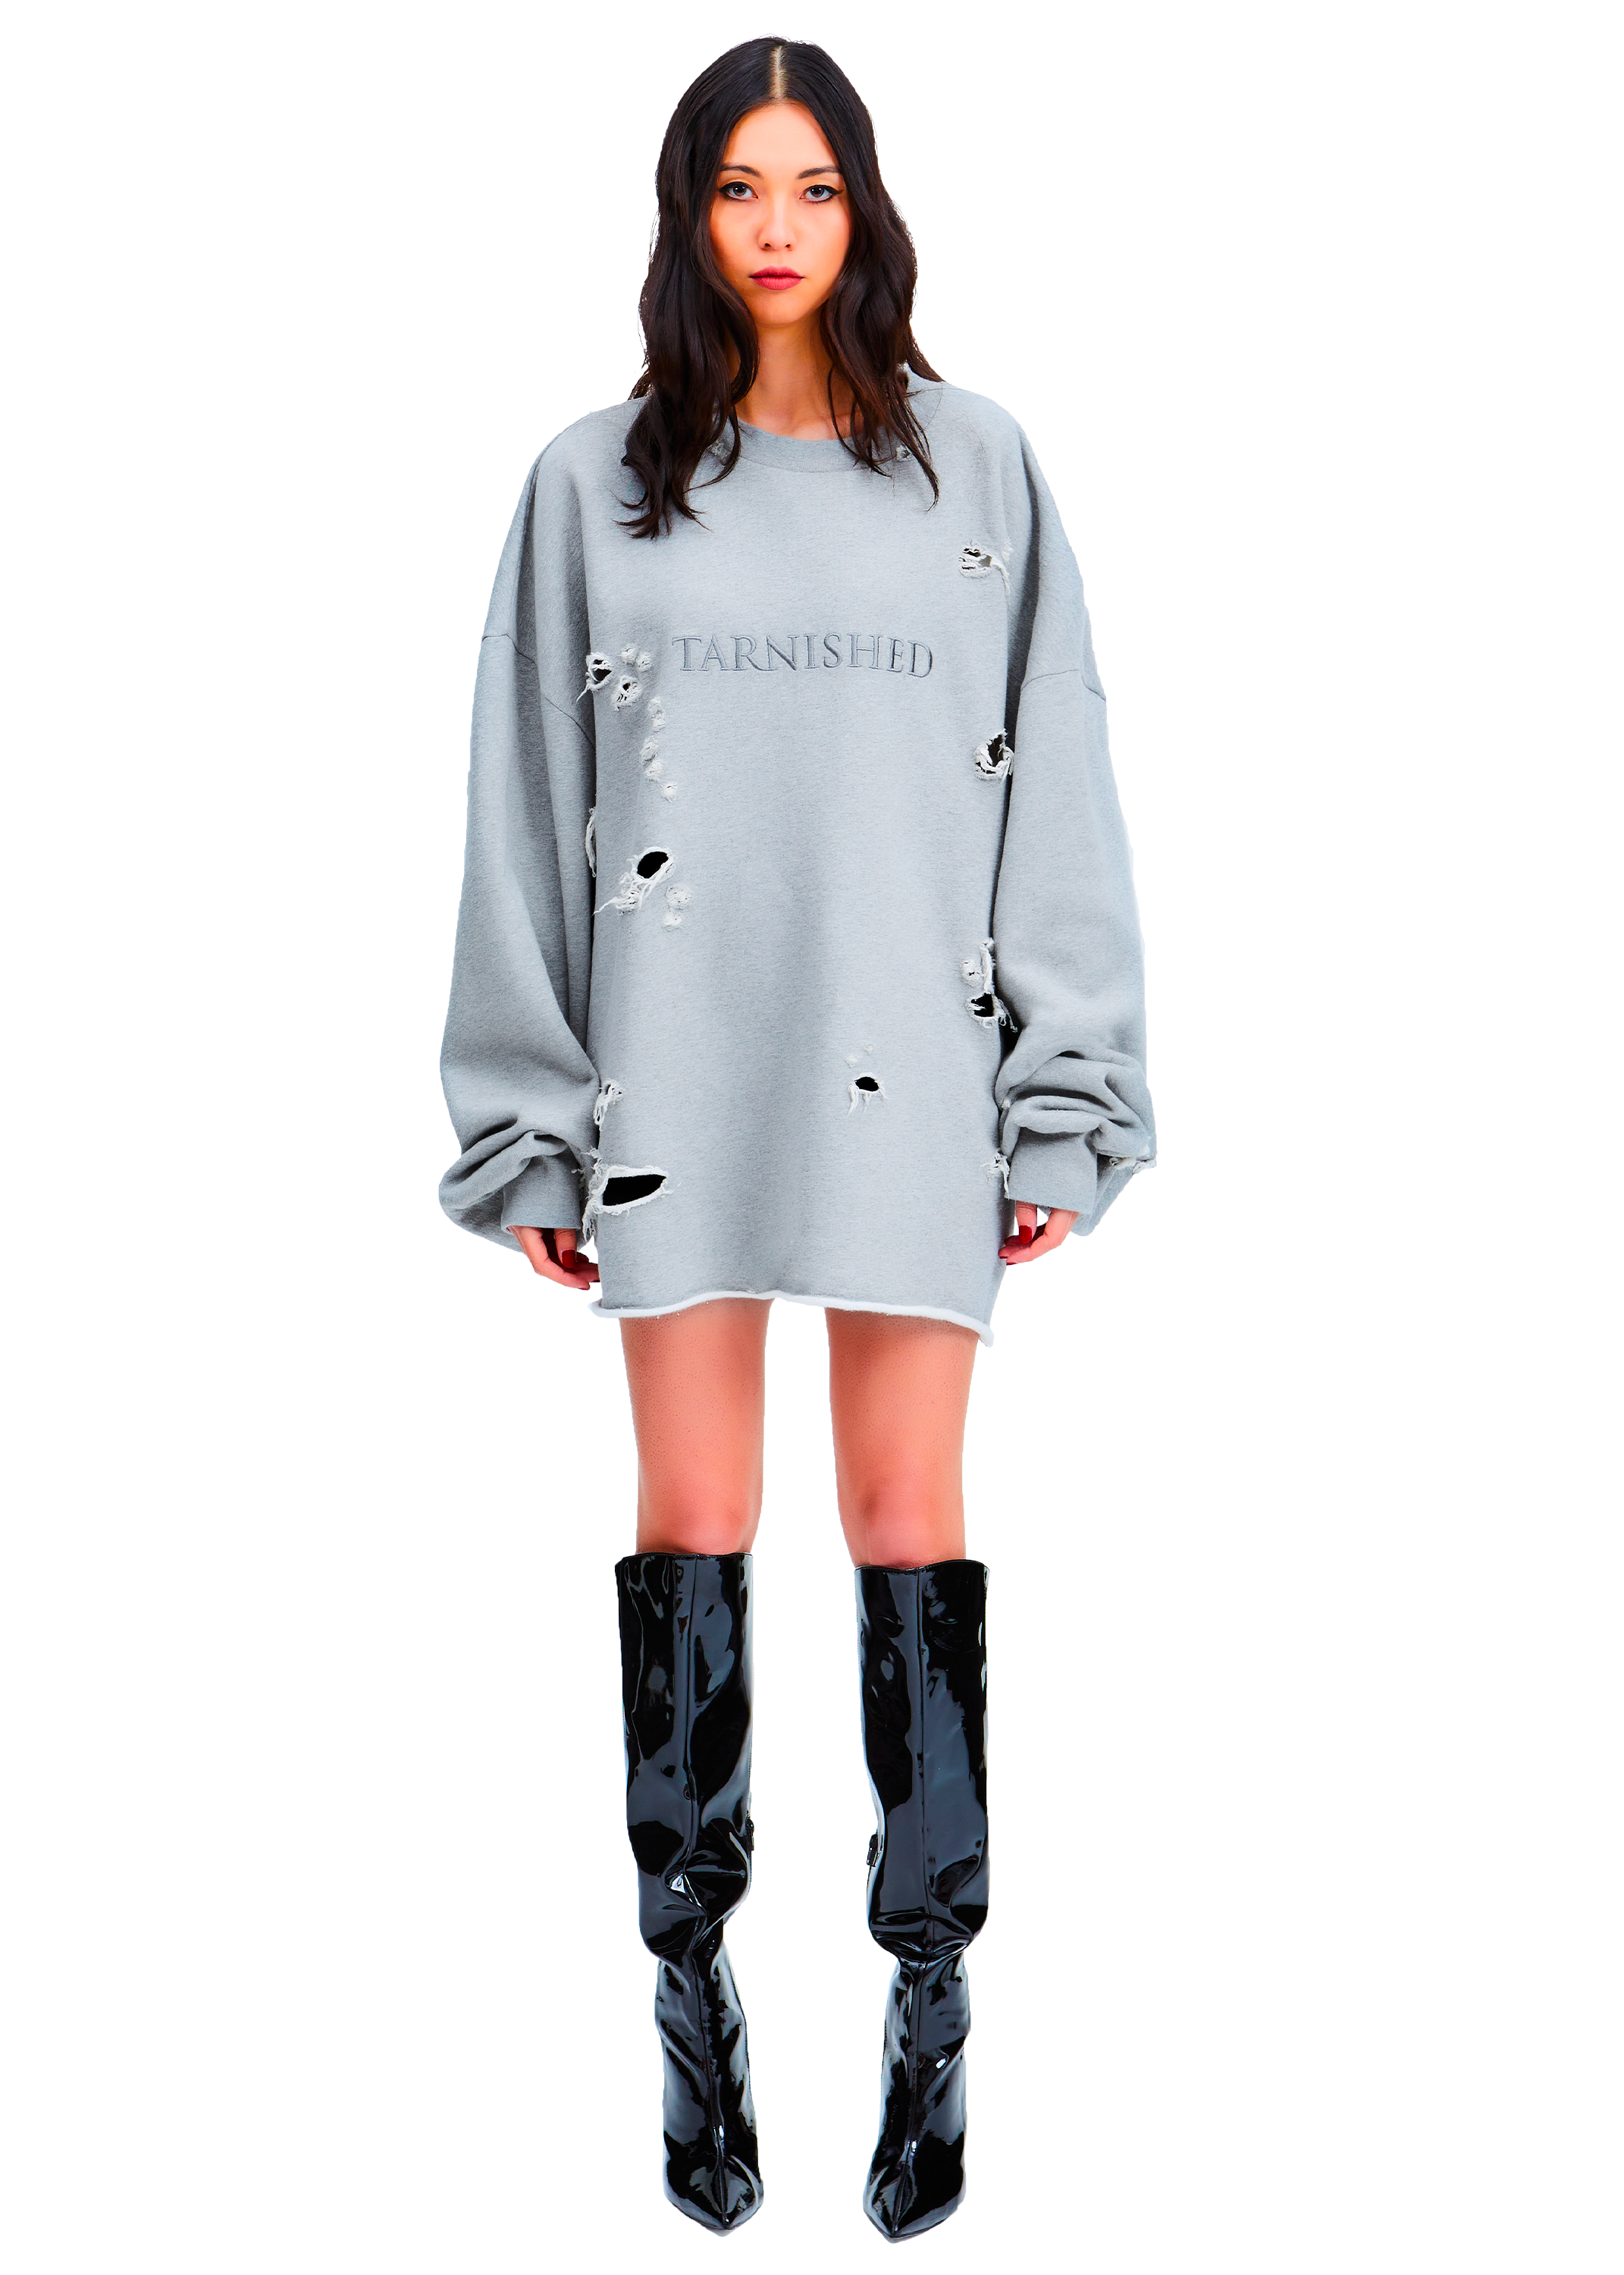 ARK8_TARNISHED_SWEATER_FRONT_GREY